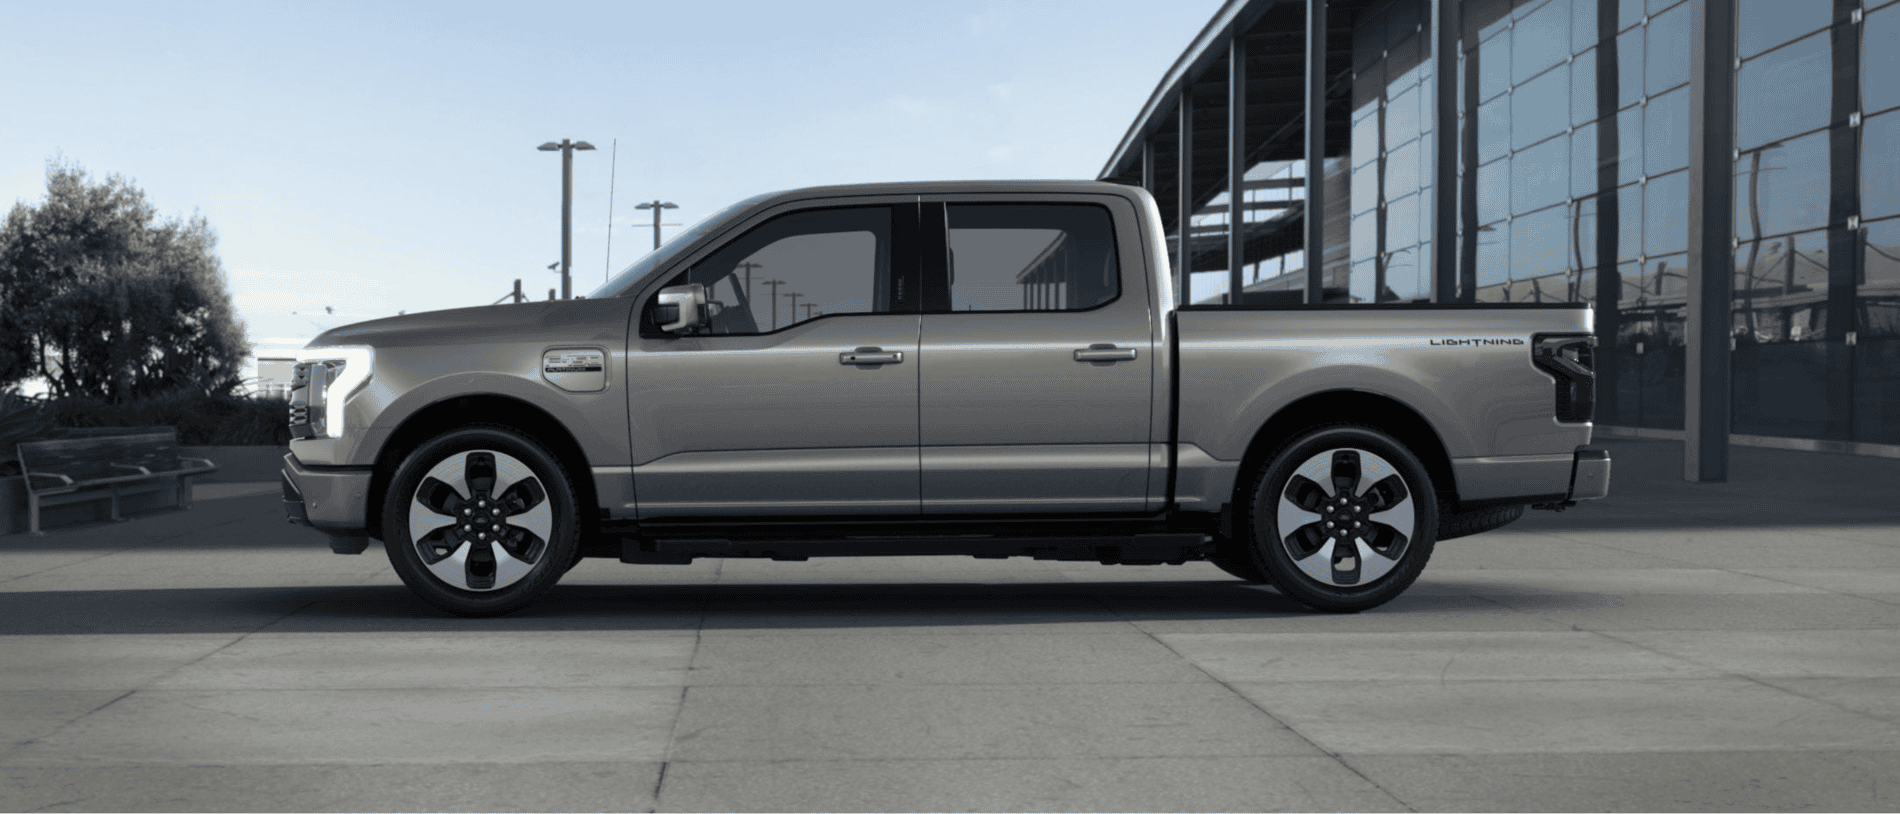 Ford F-150 Lightning Too early to talk colors for 2022 F-150 Lightning? stone-gray-